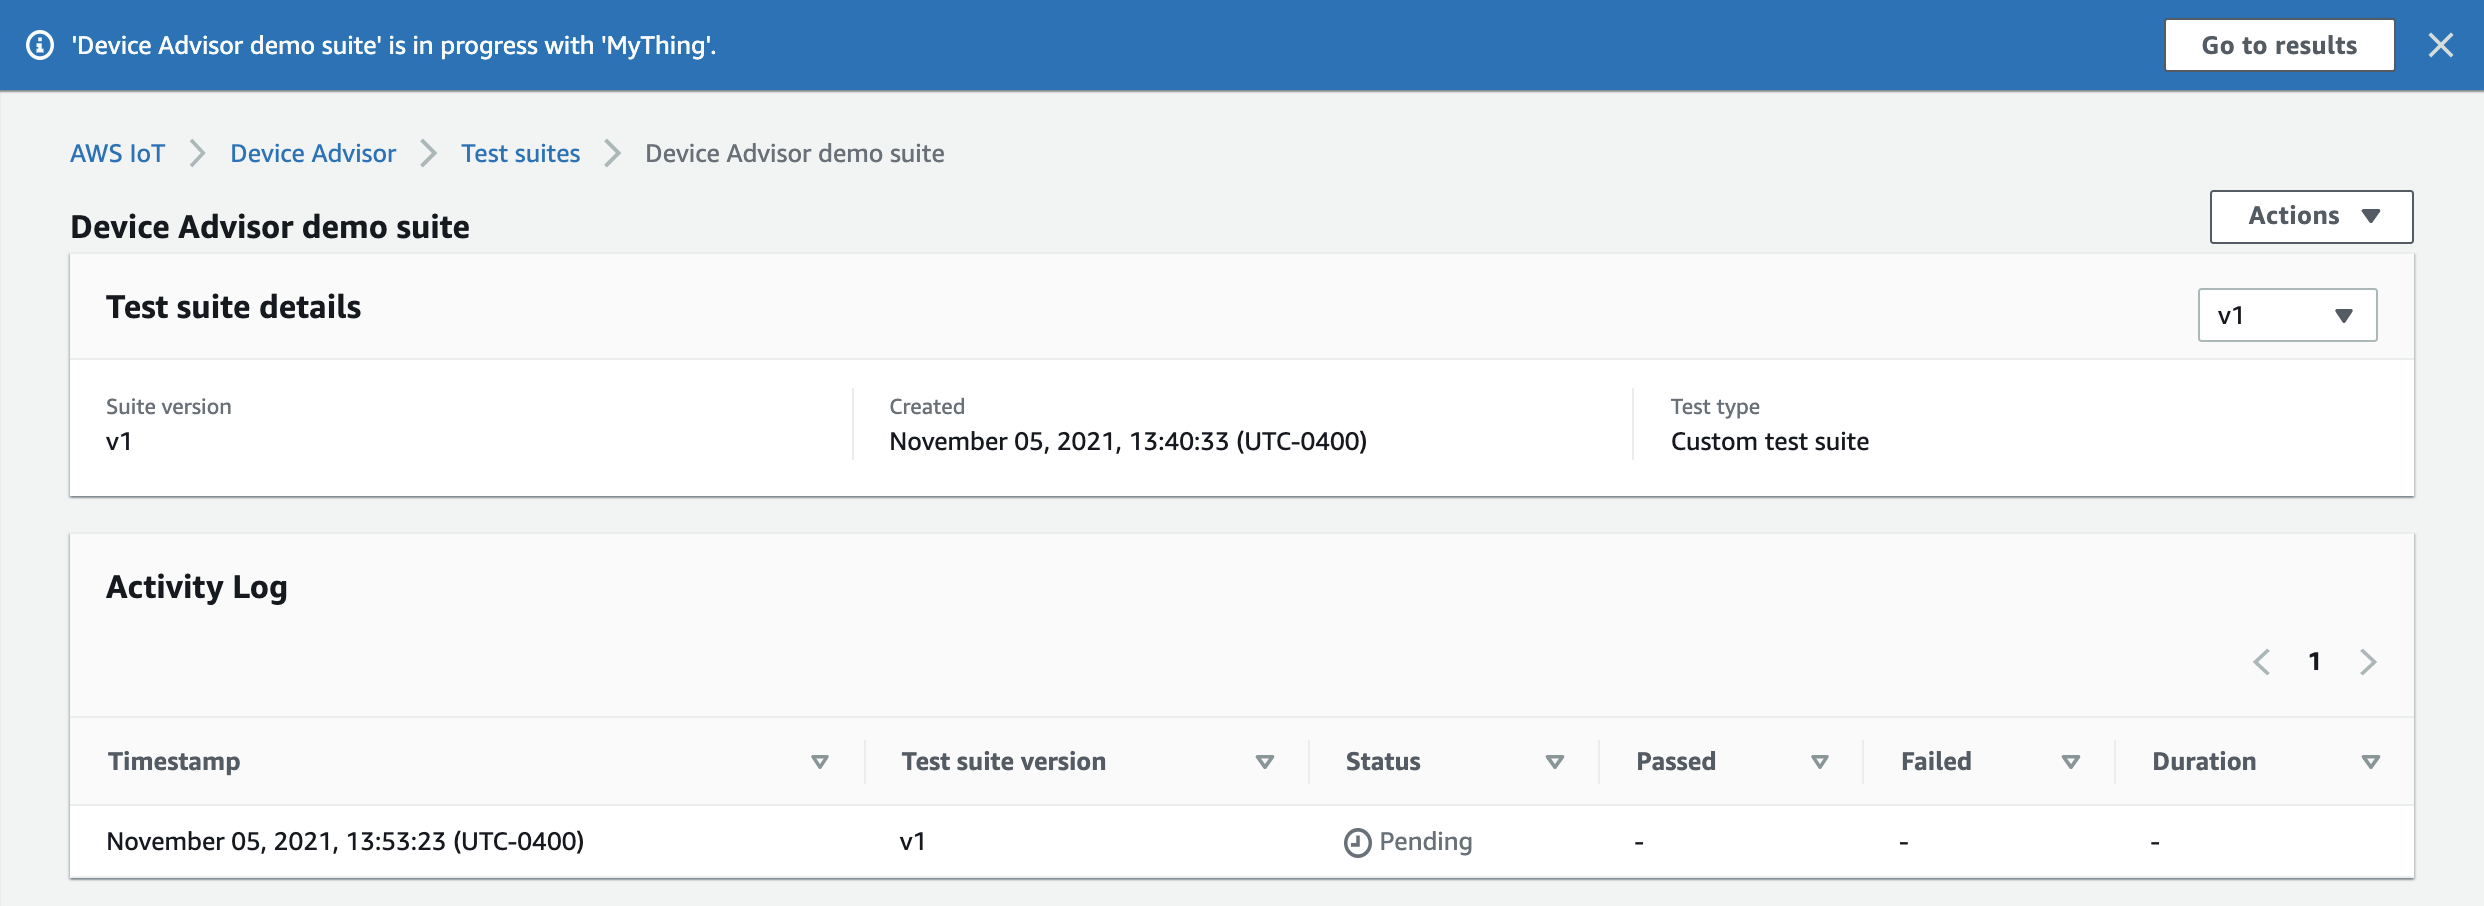 Details of a custom test suite titled 'Device Advisor demo suite' in progress with the status 'Pending'.